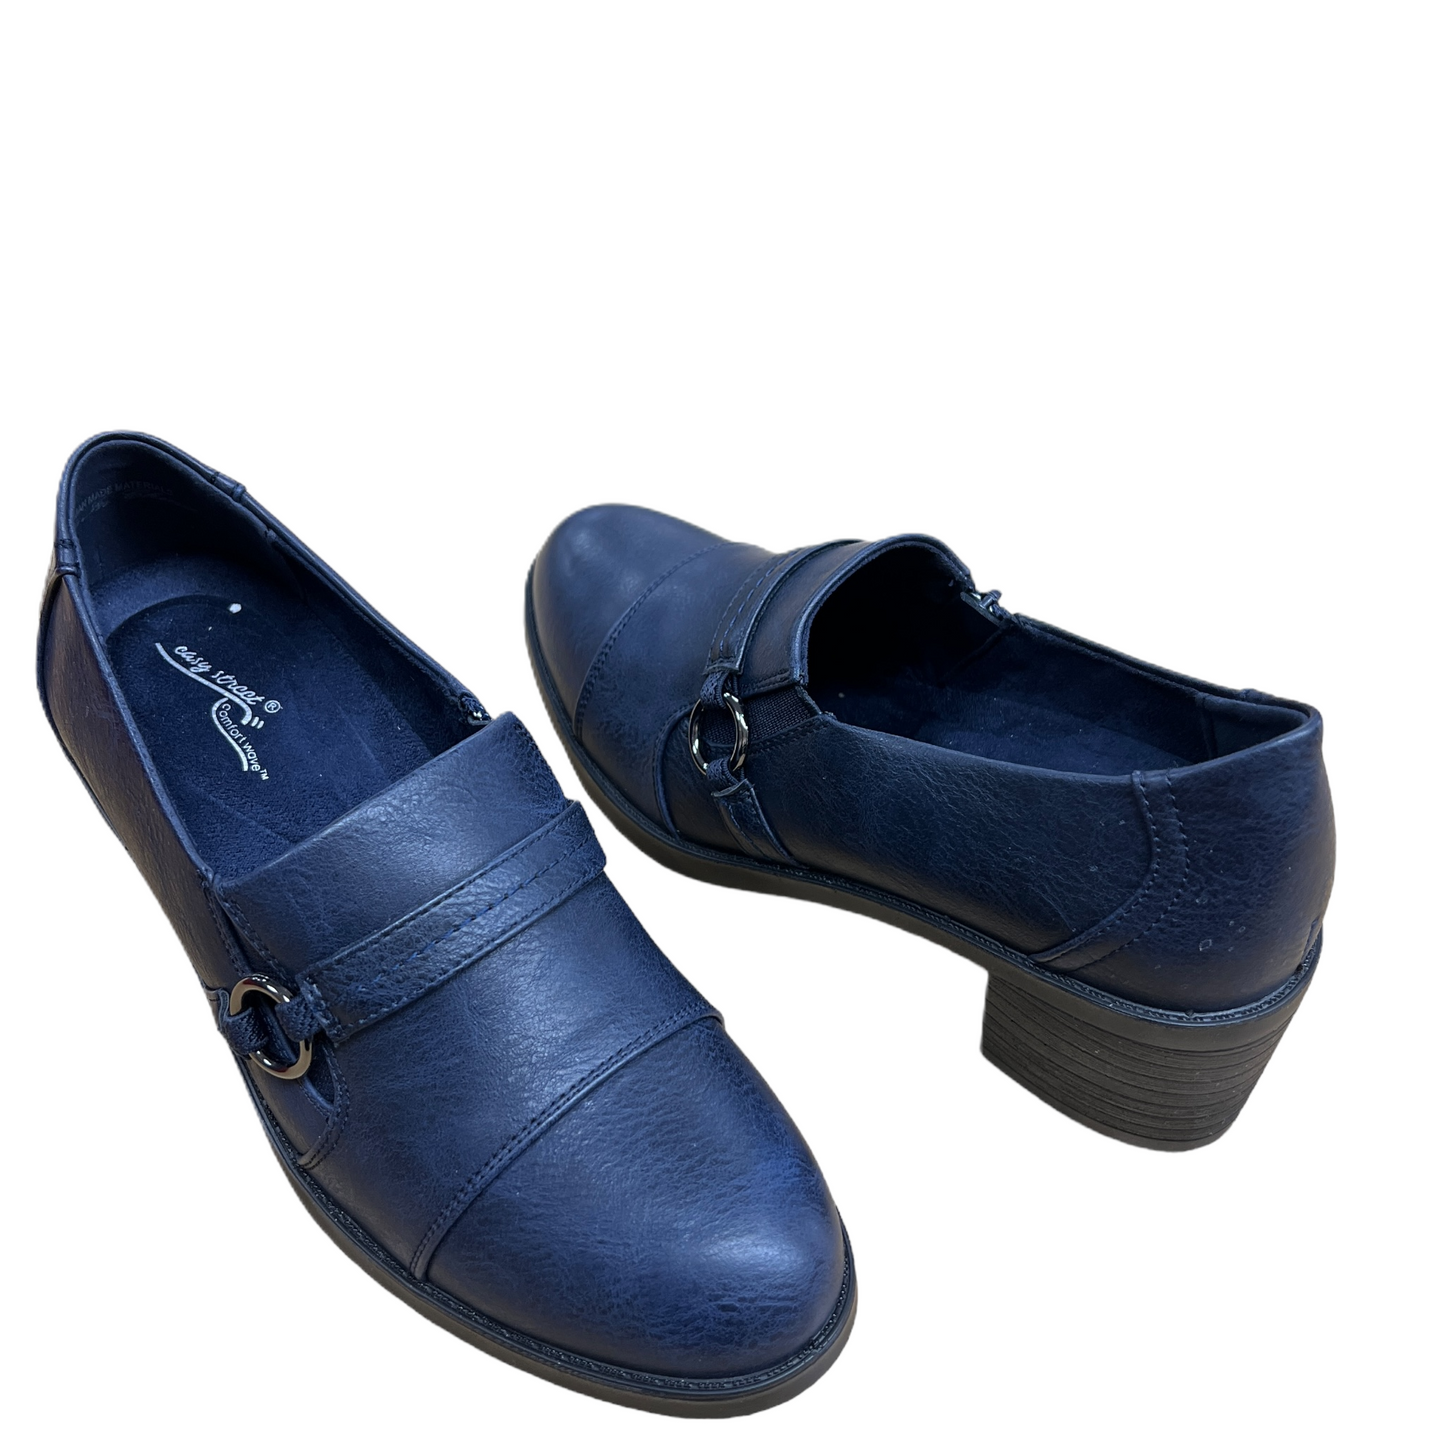 Shoes Flats Loafer Oxford By Easy Street  Size: 7